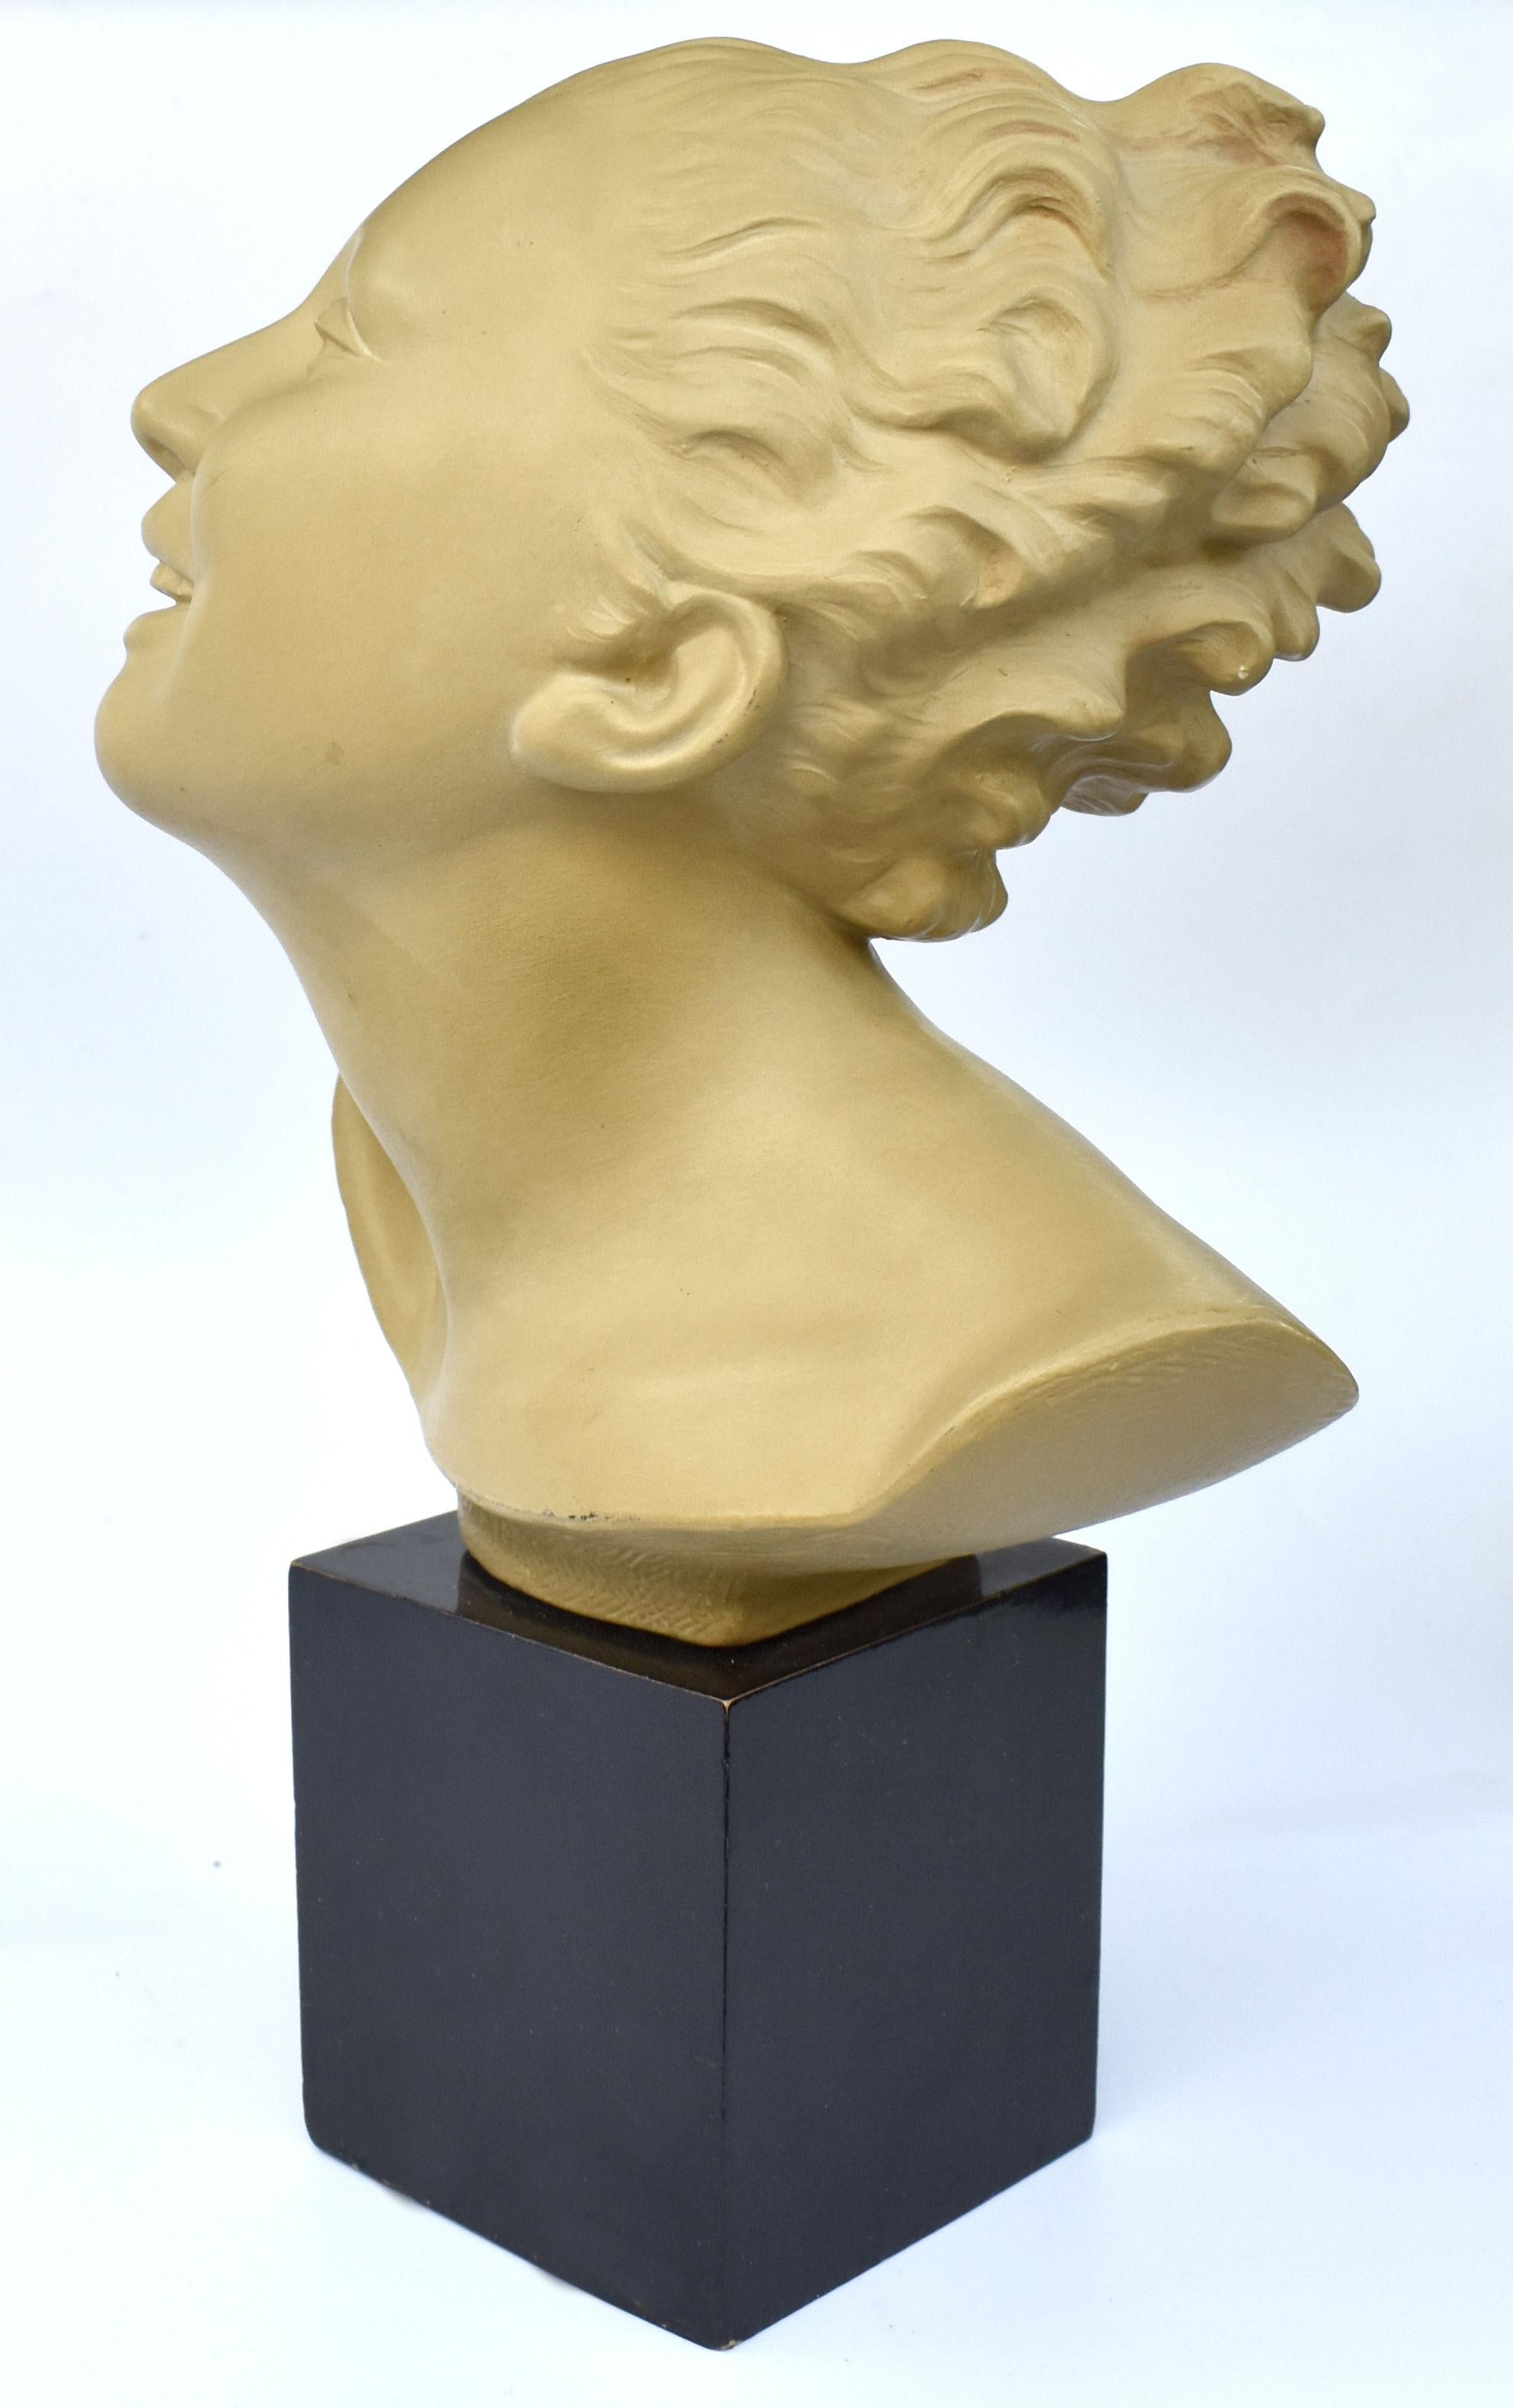 Terracotta Art Deco Bust On Stand, c1930 By Bohumil Rezl For Sale